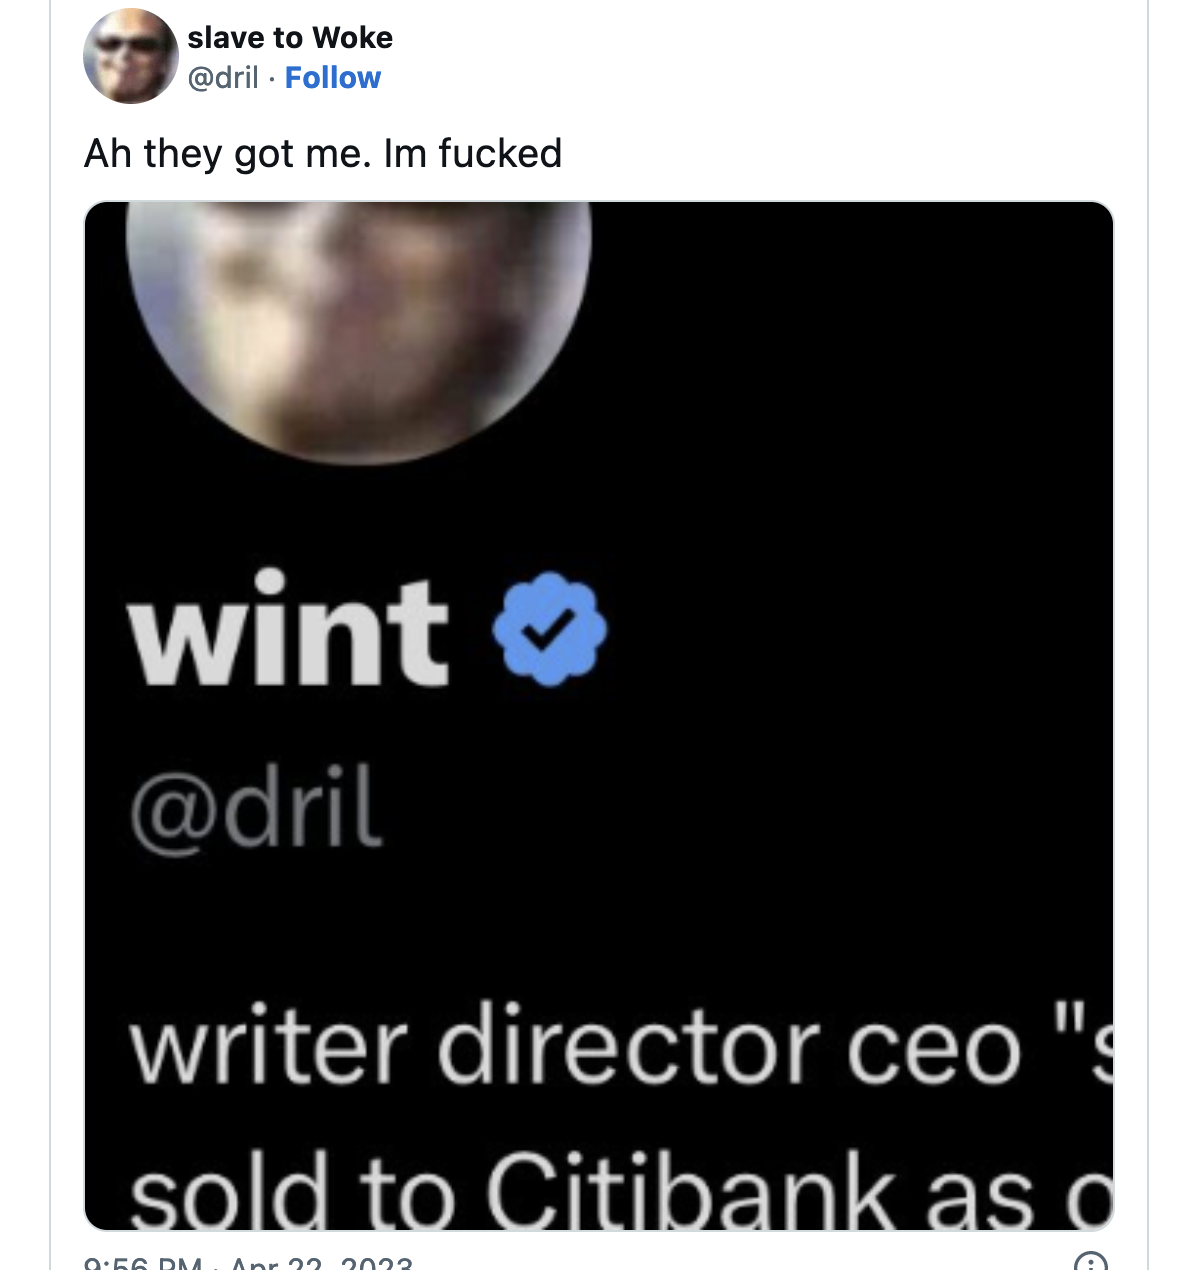 screenshot of Dril tweet showing his account with a blue tick "Ah they got me. Im fucked" he says